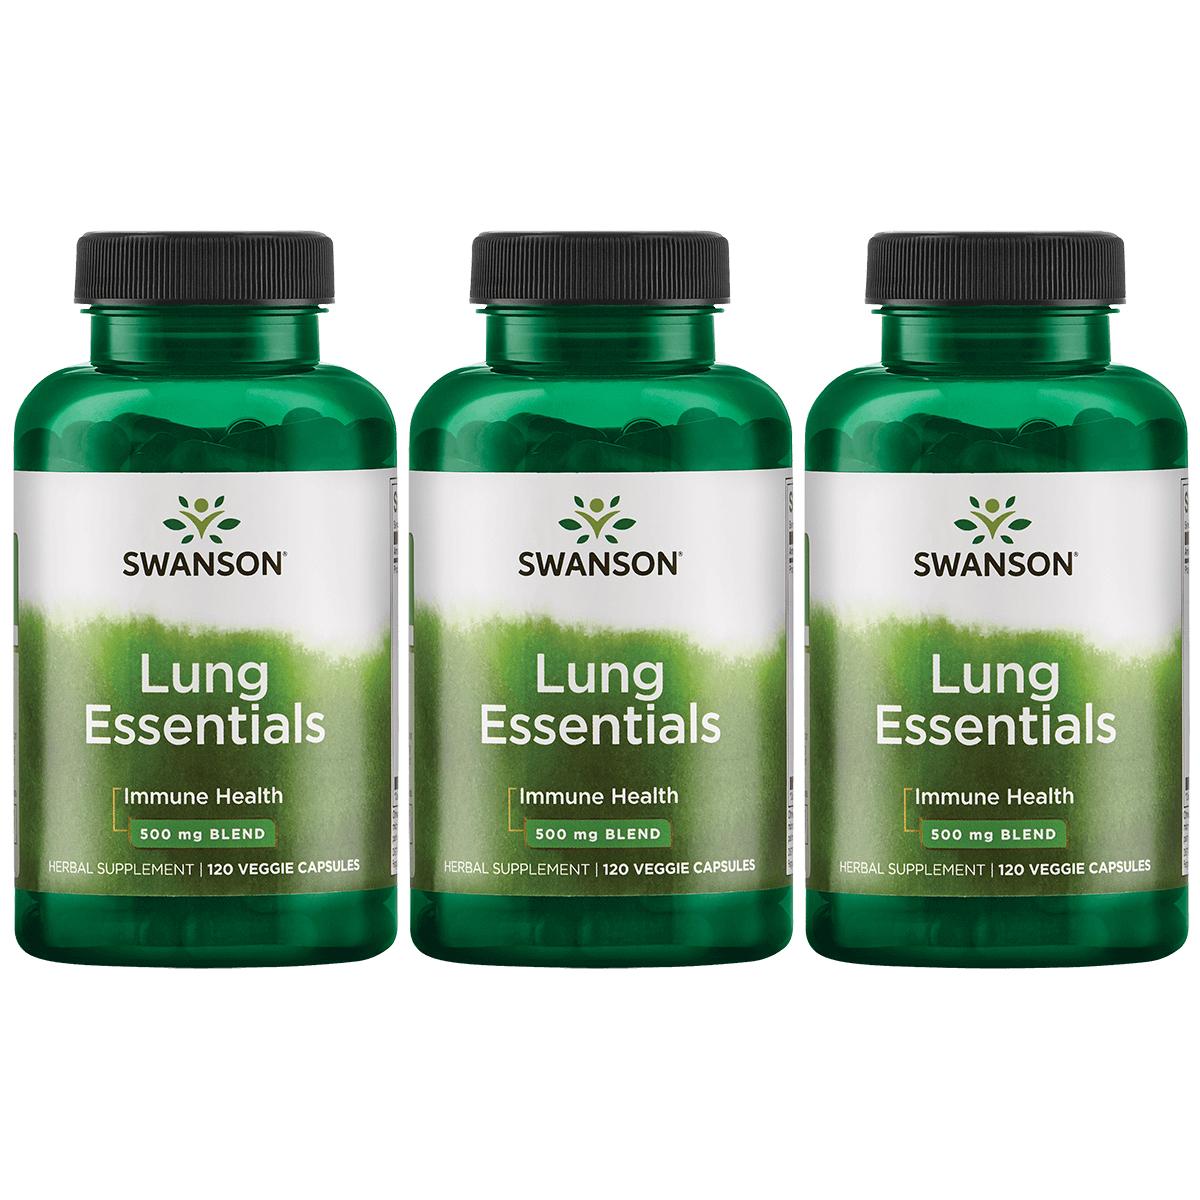 Swanson Condition Specific Formulas Lung Essentials 3 Pack 500 mg 120 Veg Caps Respiratory Health